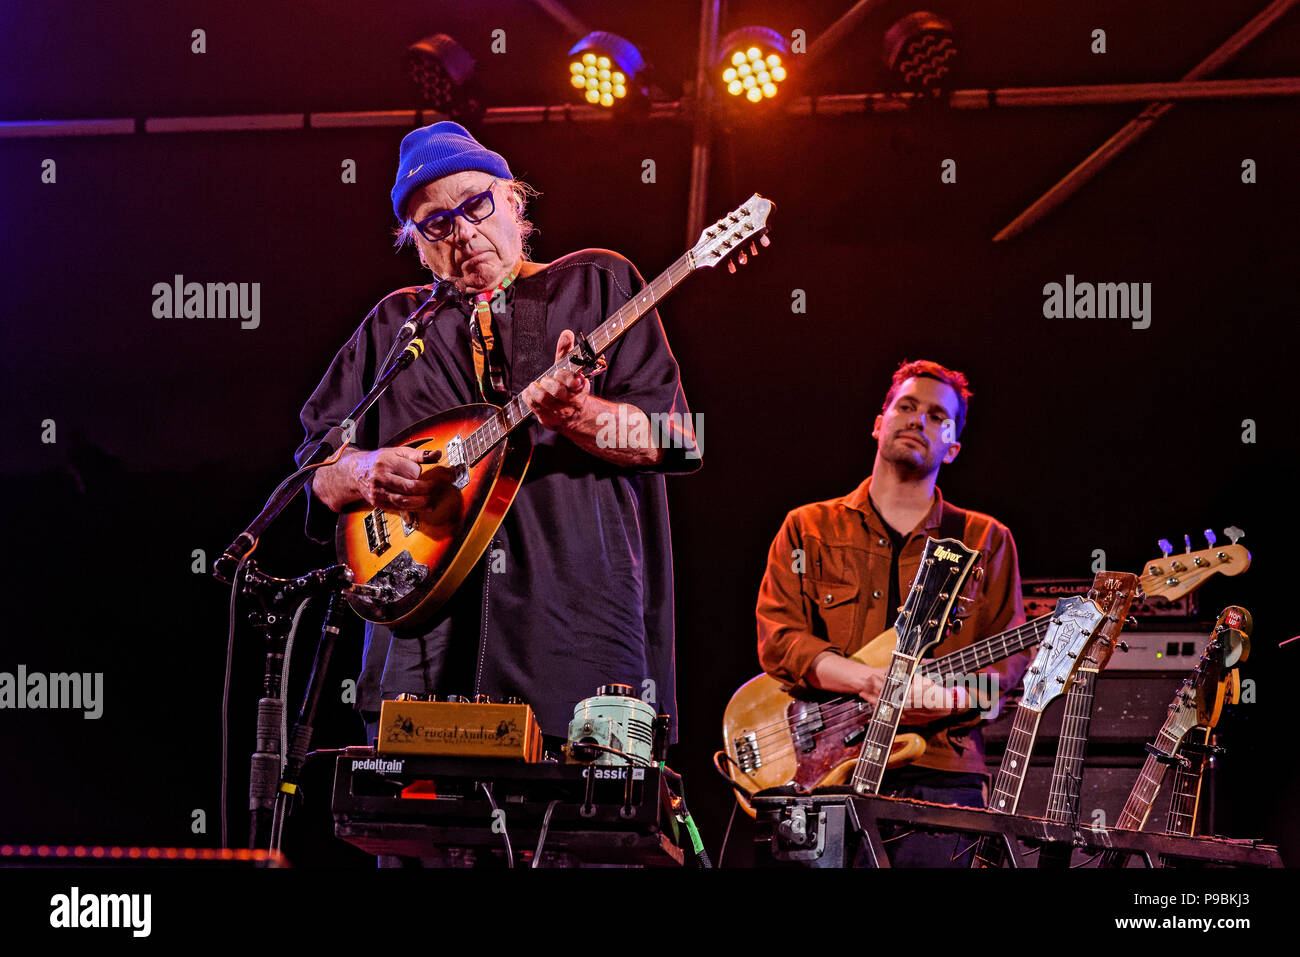 Cantante, chitarrista Ry Cooder live performance, Vancouver Folk Music Festival, Vancouver, British Columbia, Canada. Foto Stock